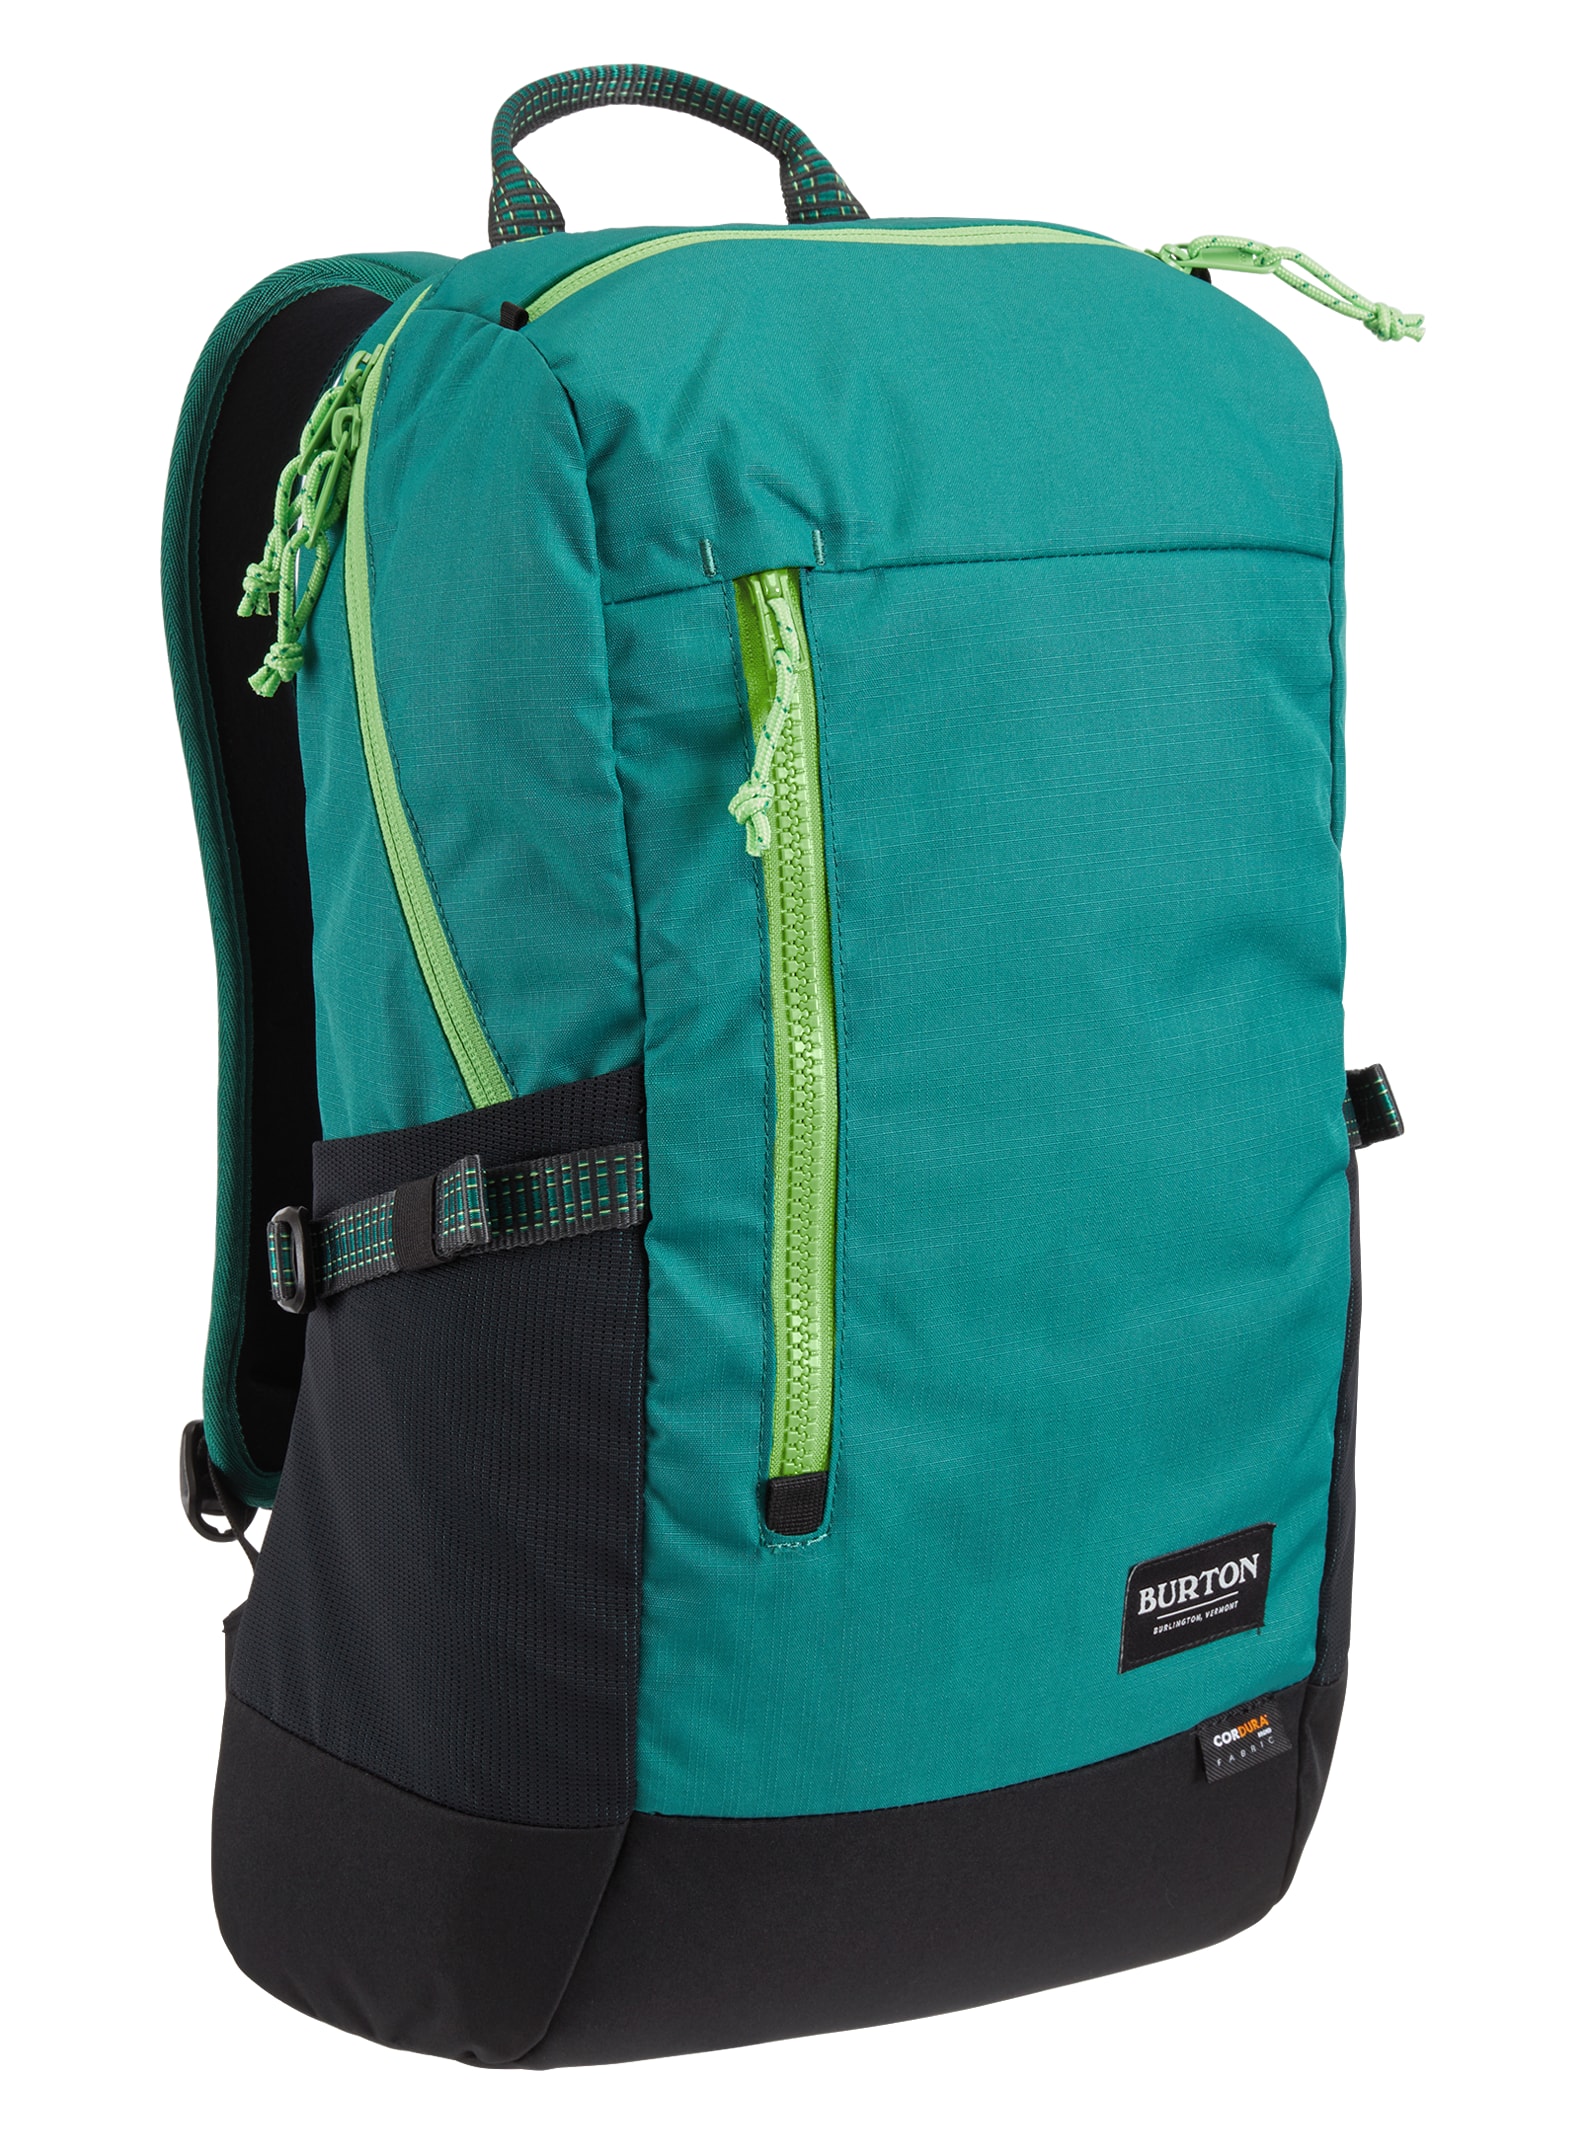 Water Bottle Pockets Compression Straps Burton Prospect Backpack with Padded Laptop Sleeve